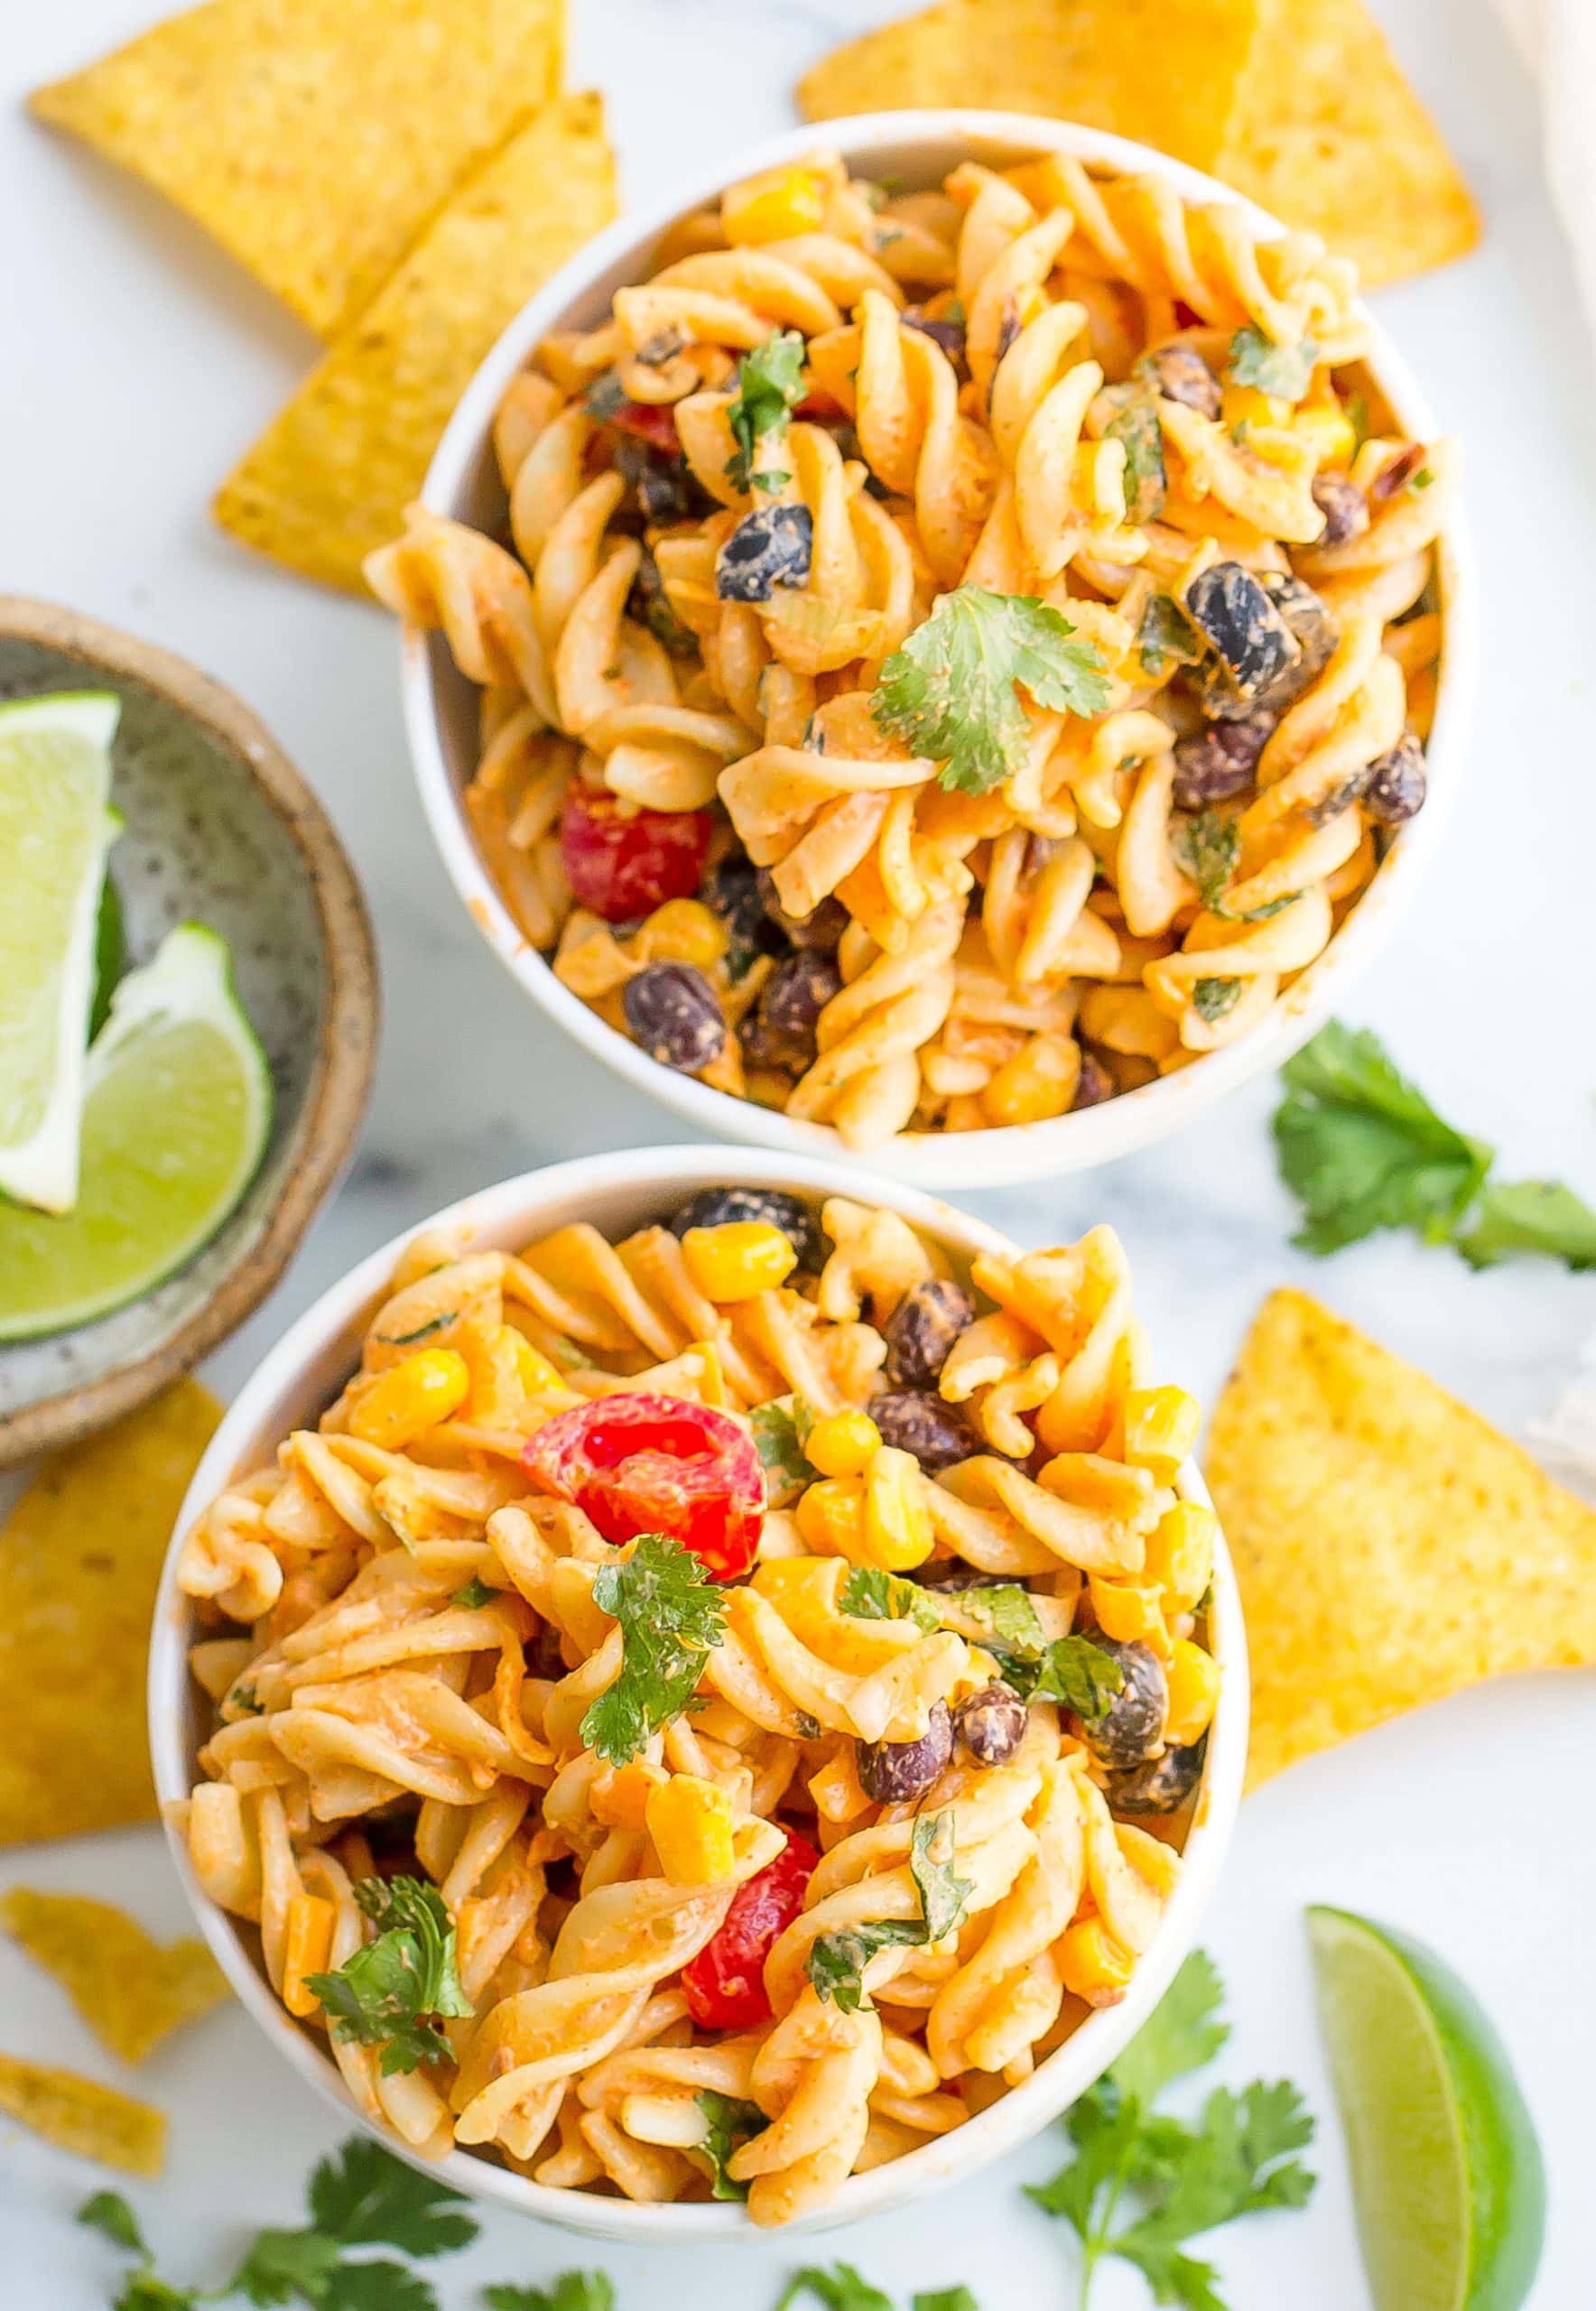 taco pasta salad in small white bowls with chips on the side